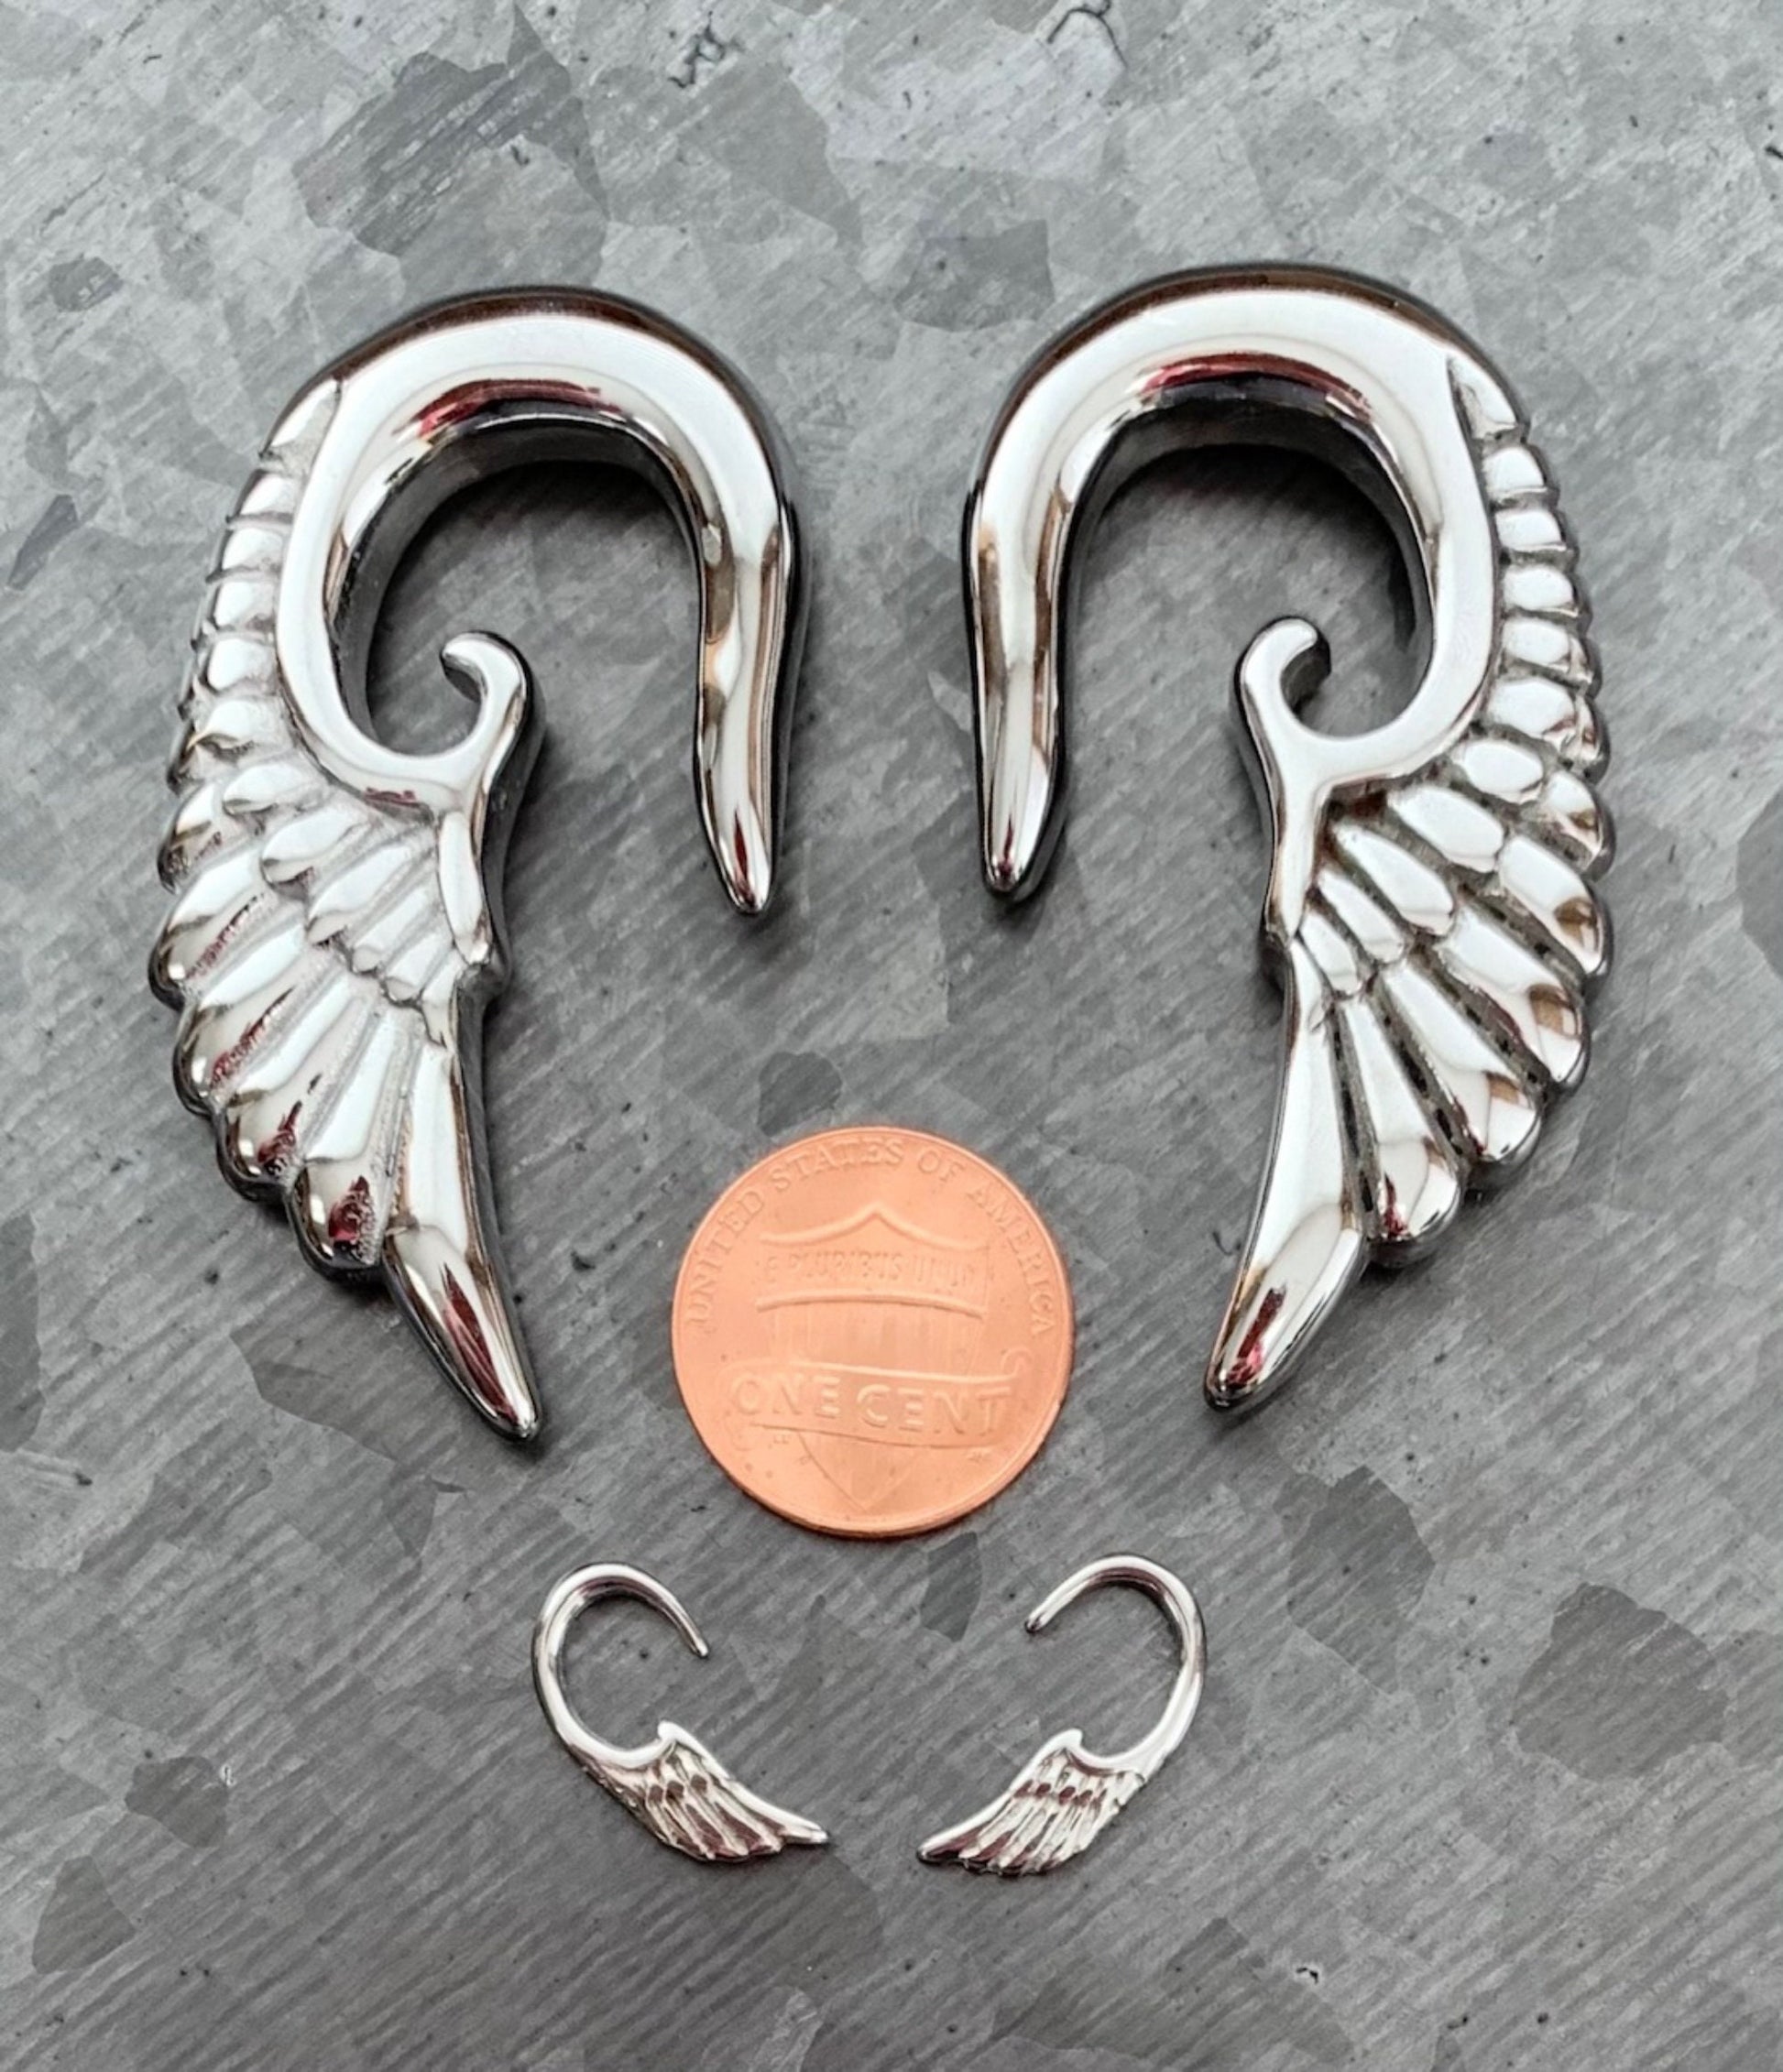 PAIR of Stunning 316L Surgical Steel Angel Wing Hanging Tapers Expanders - Gauges 14g (1.3mm) thru 0g (8mm) available!